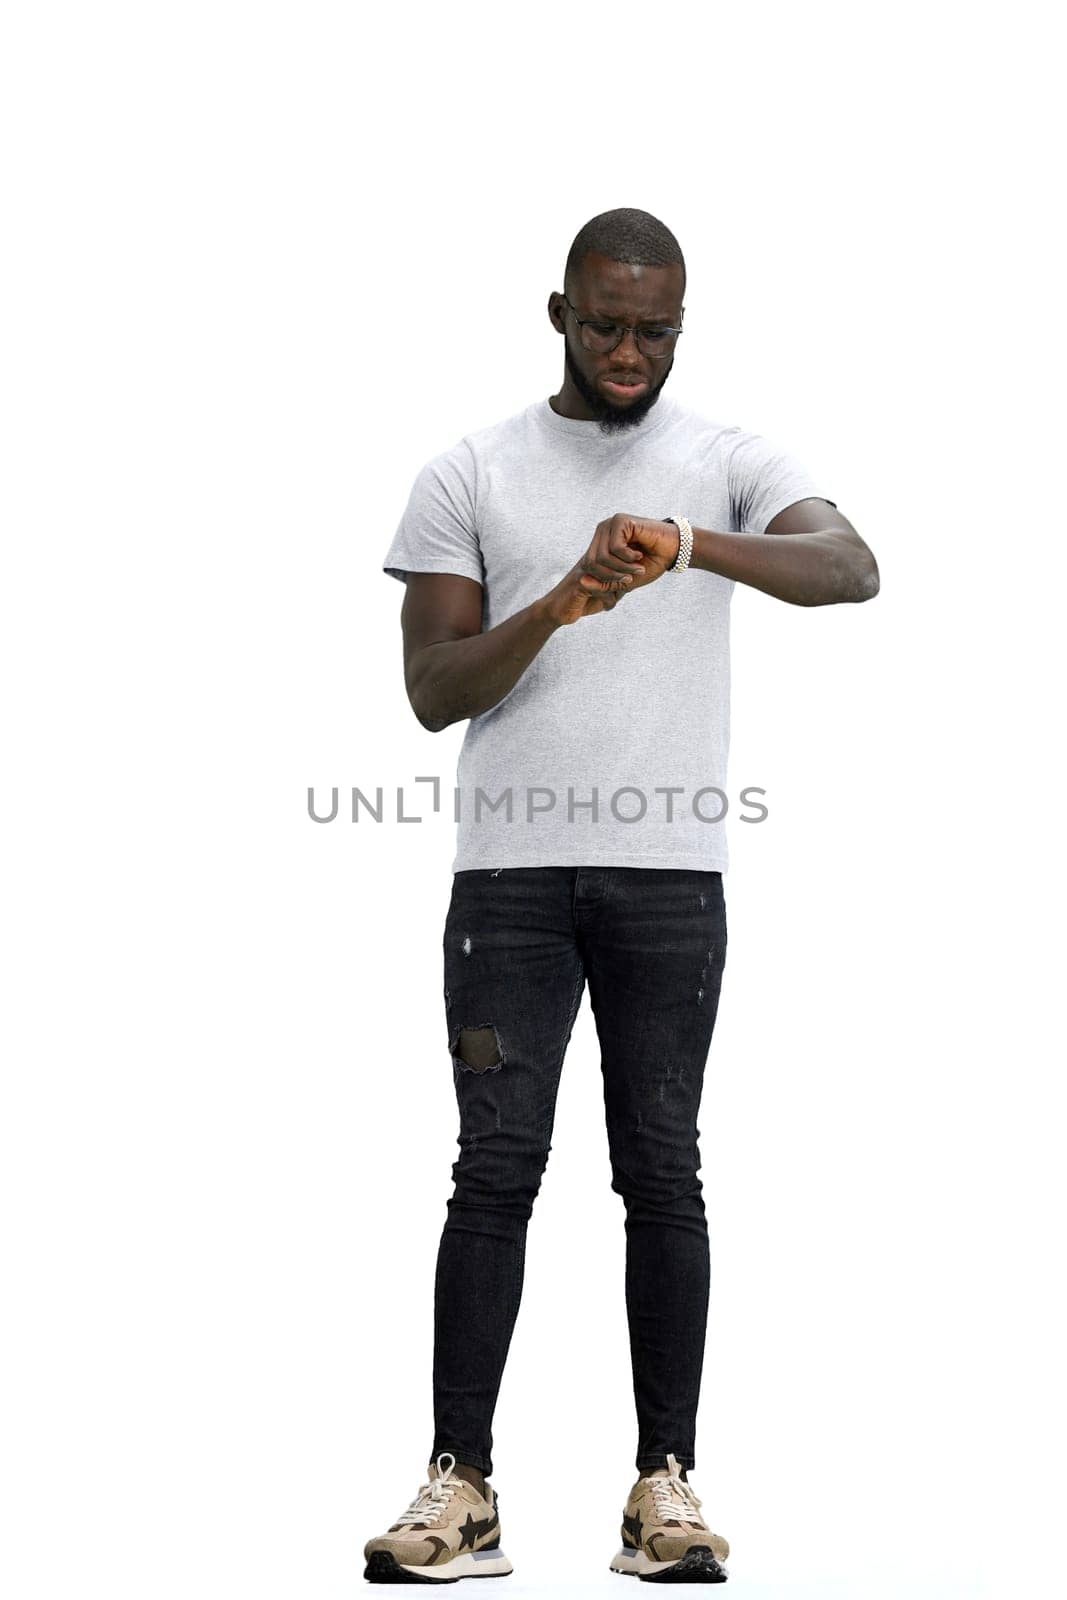 A man, full-length, on a white background, looks at his watch.